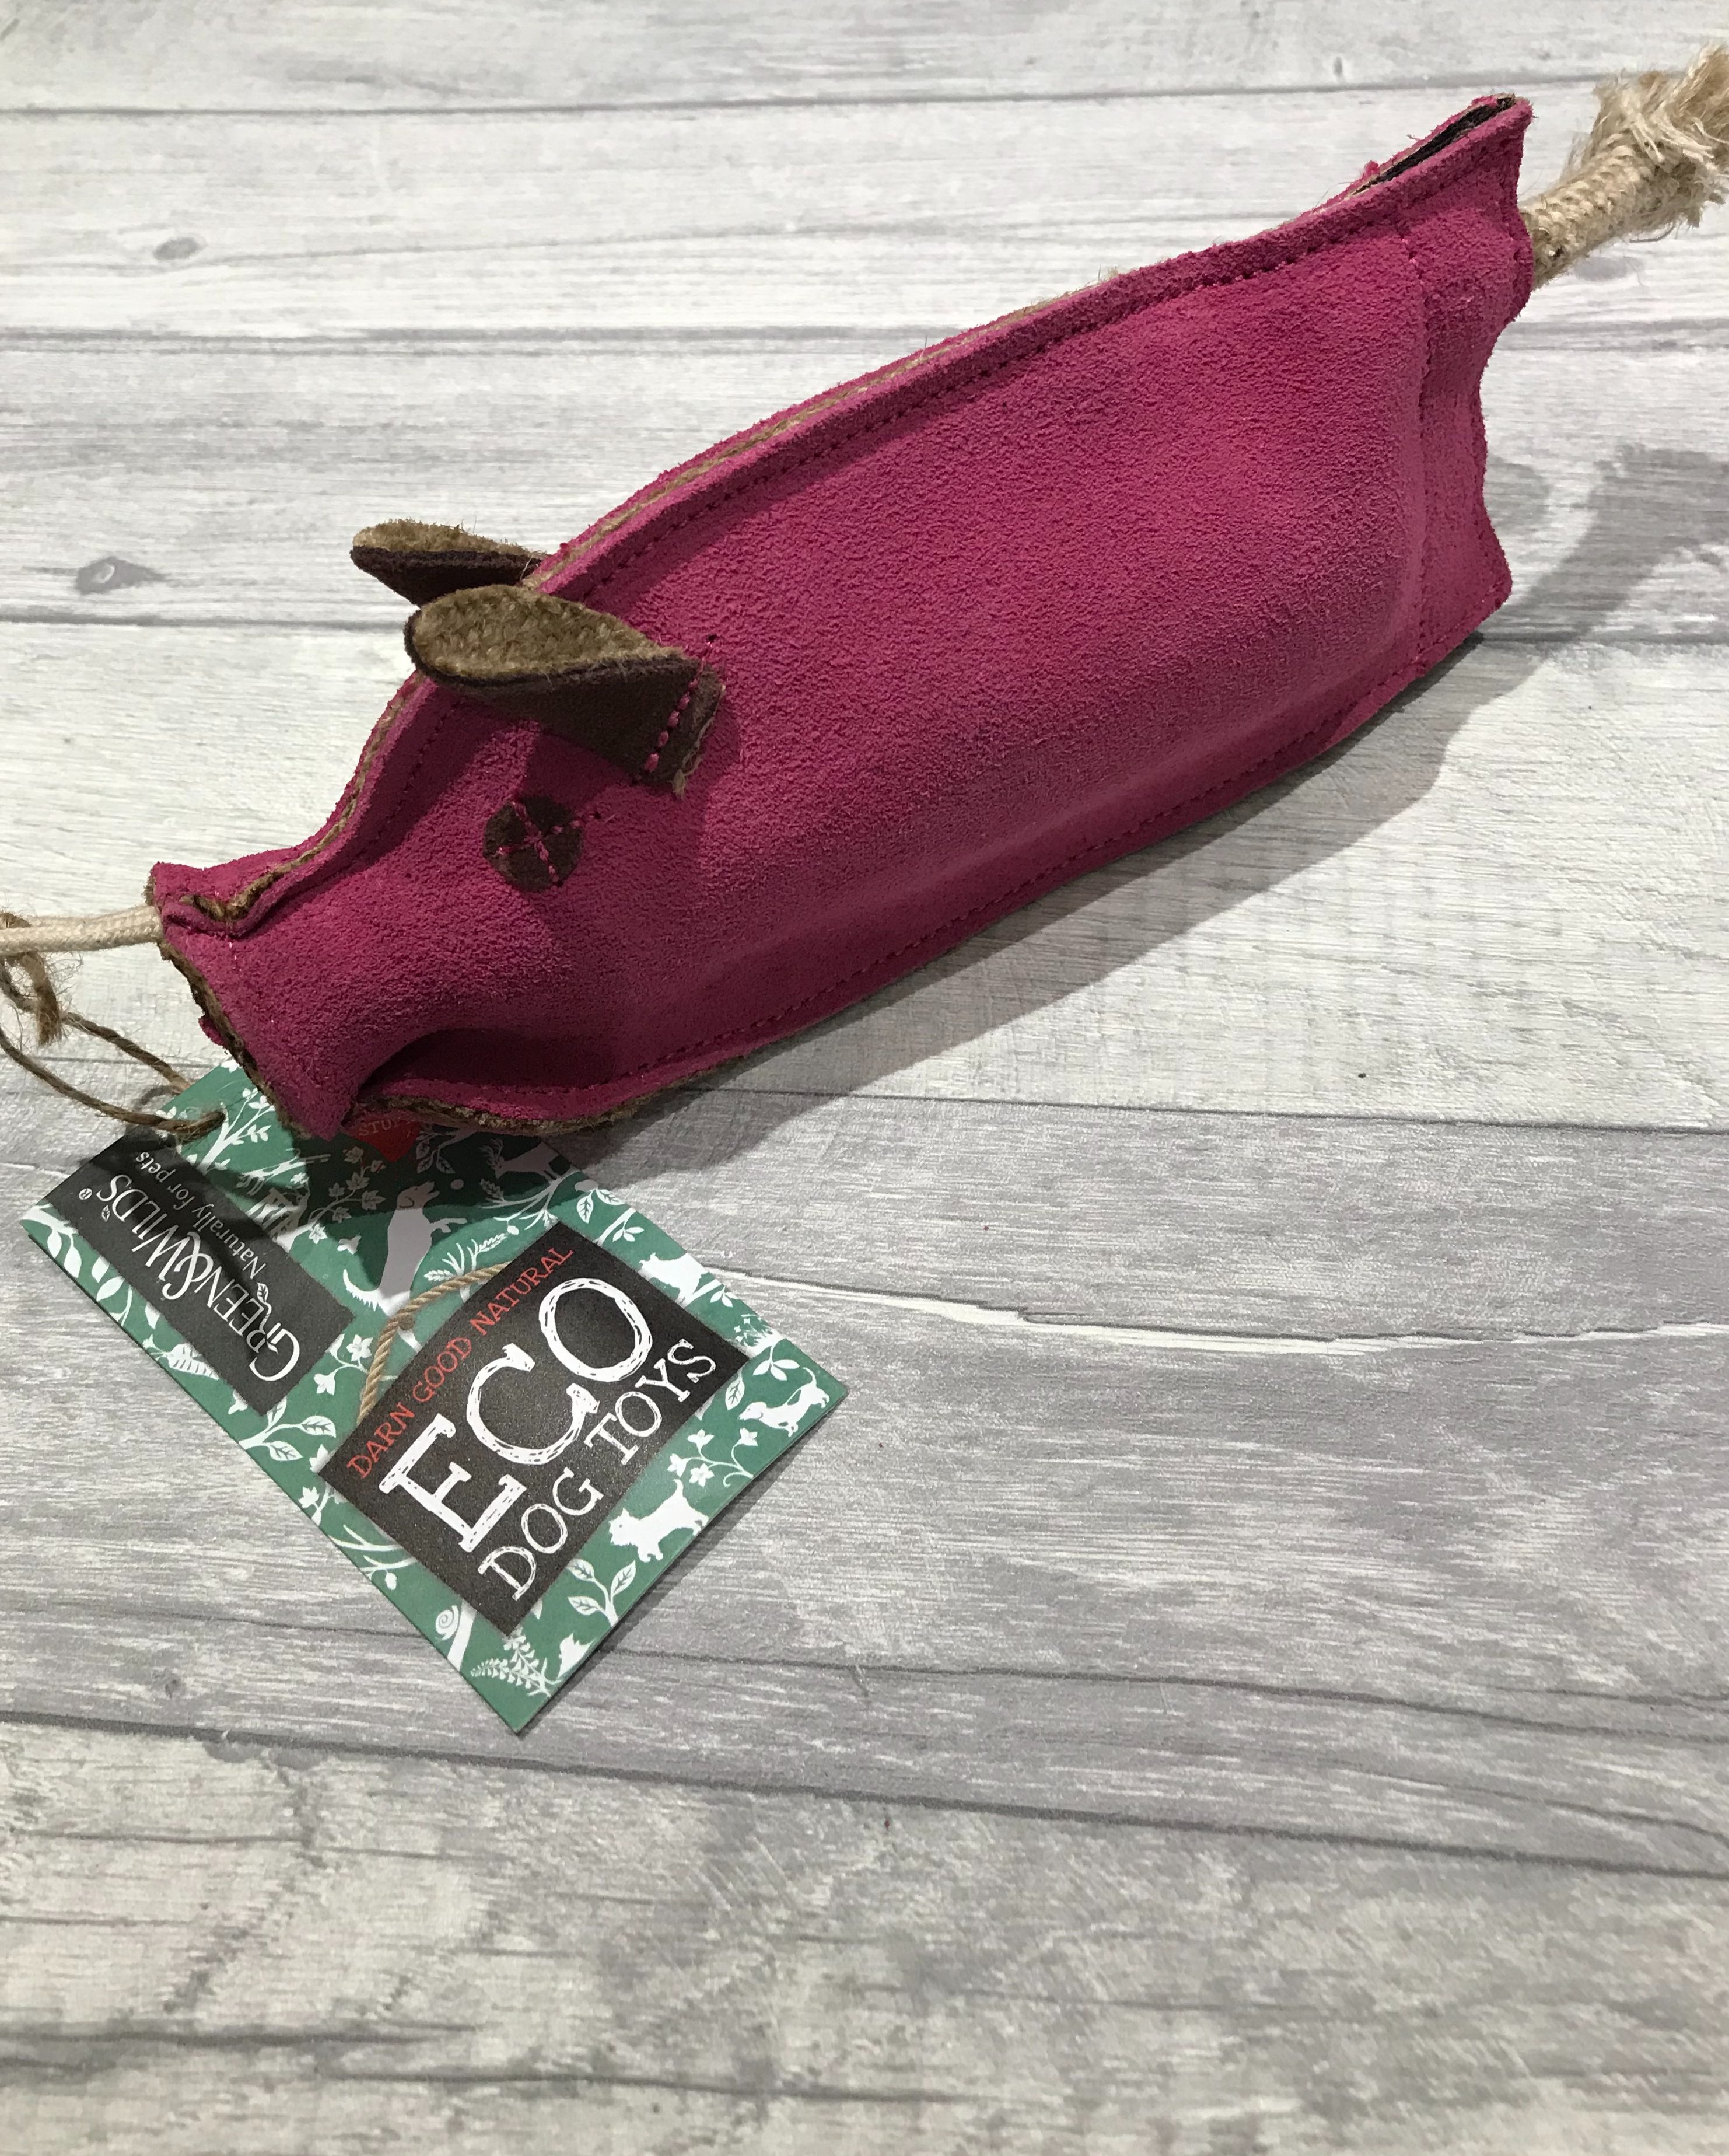 Peggy the Pig Eco Dog Toy - Green and Wilds